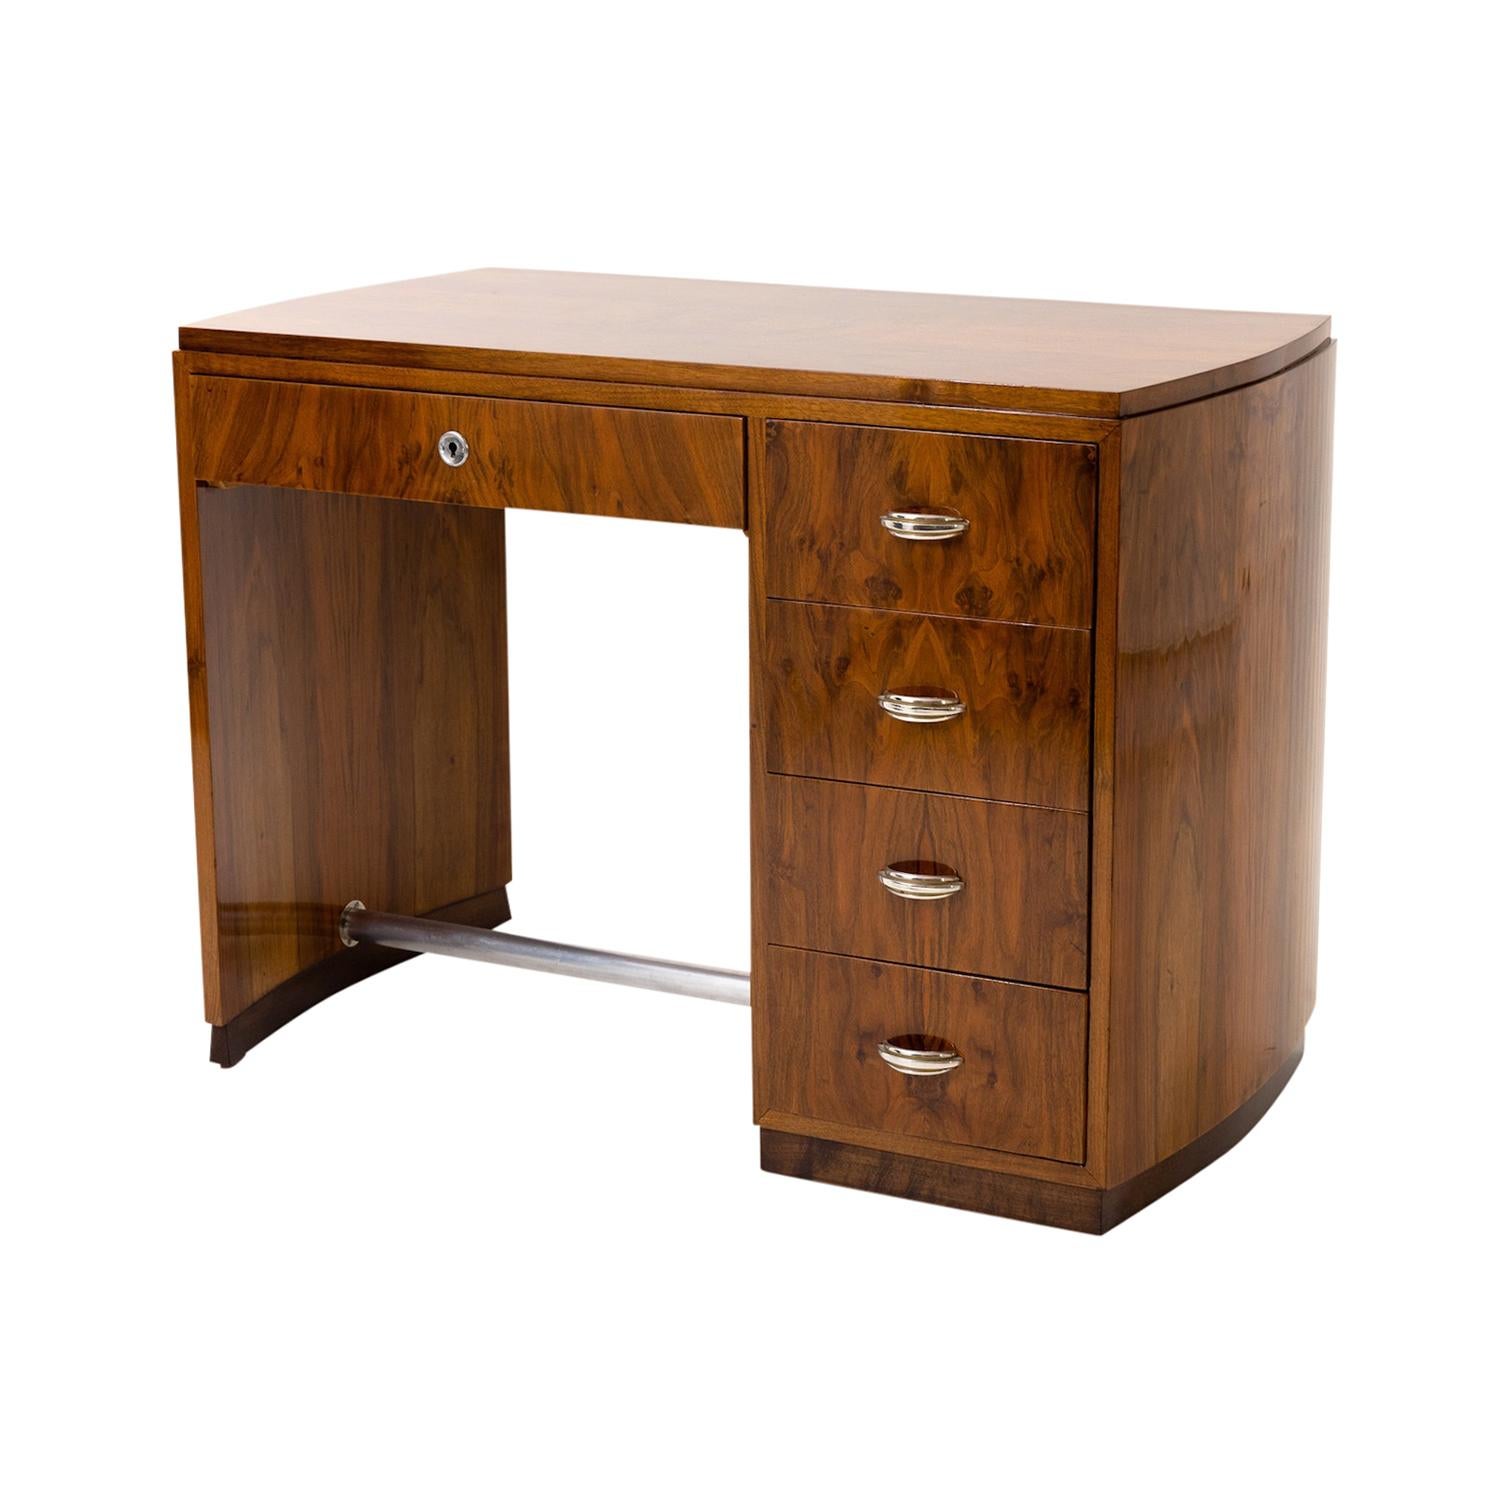 A vintage French Art Deco writing table with rounded sides, made of hand crafted polished, partly veneered Walnut with a tubular steel footrest, in good condition. The freestanding desk is composed with four small drawers and chrome handles, pulls,